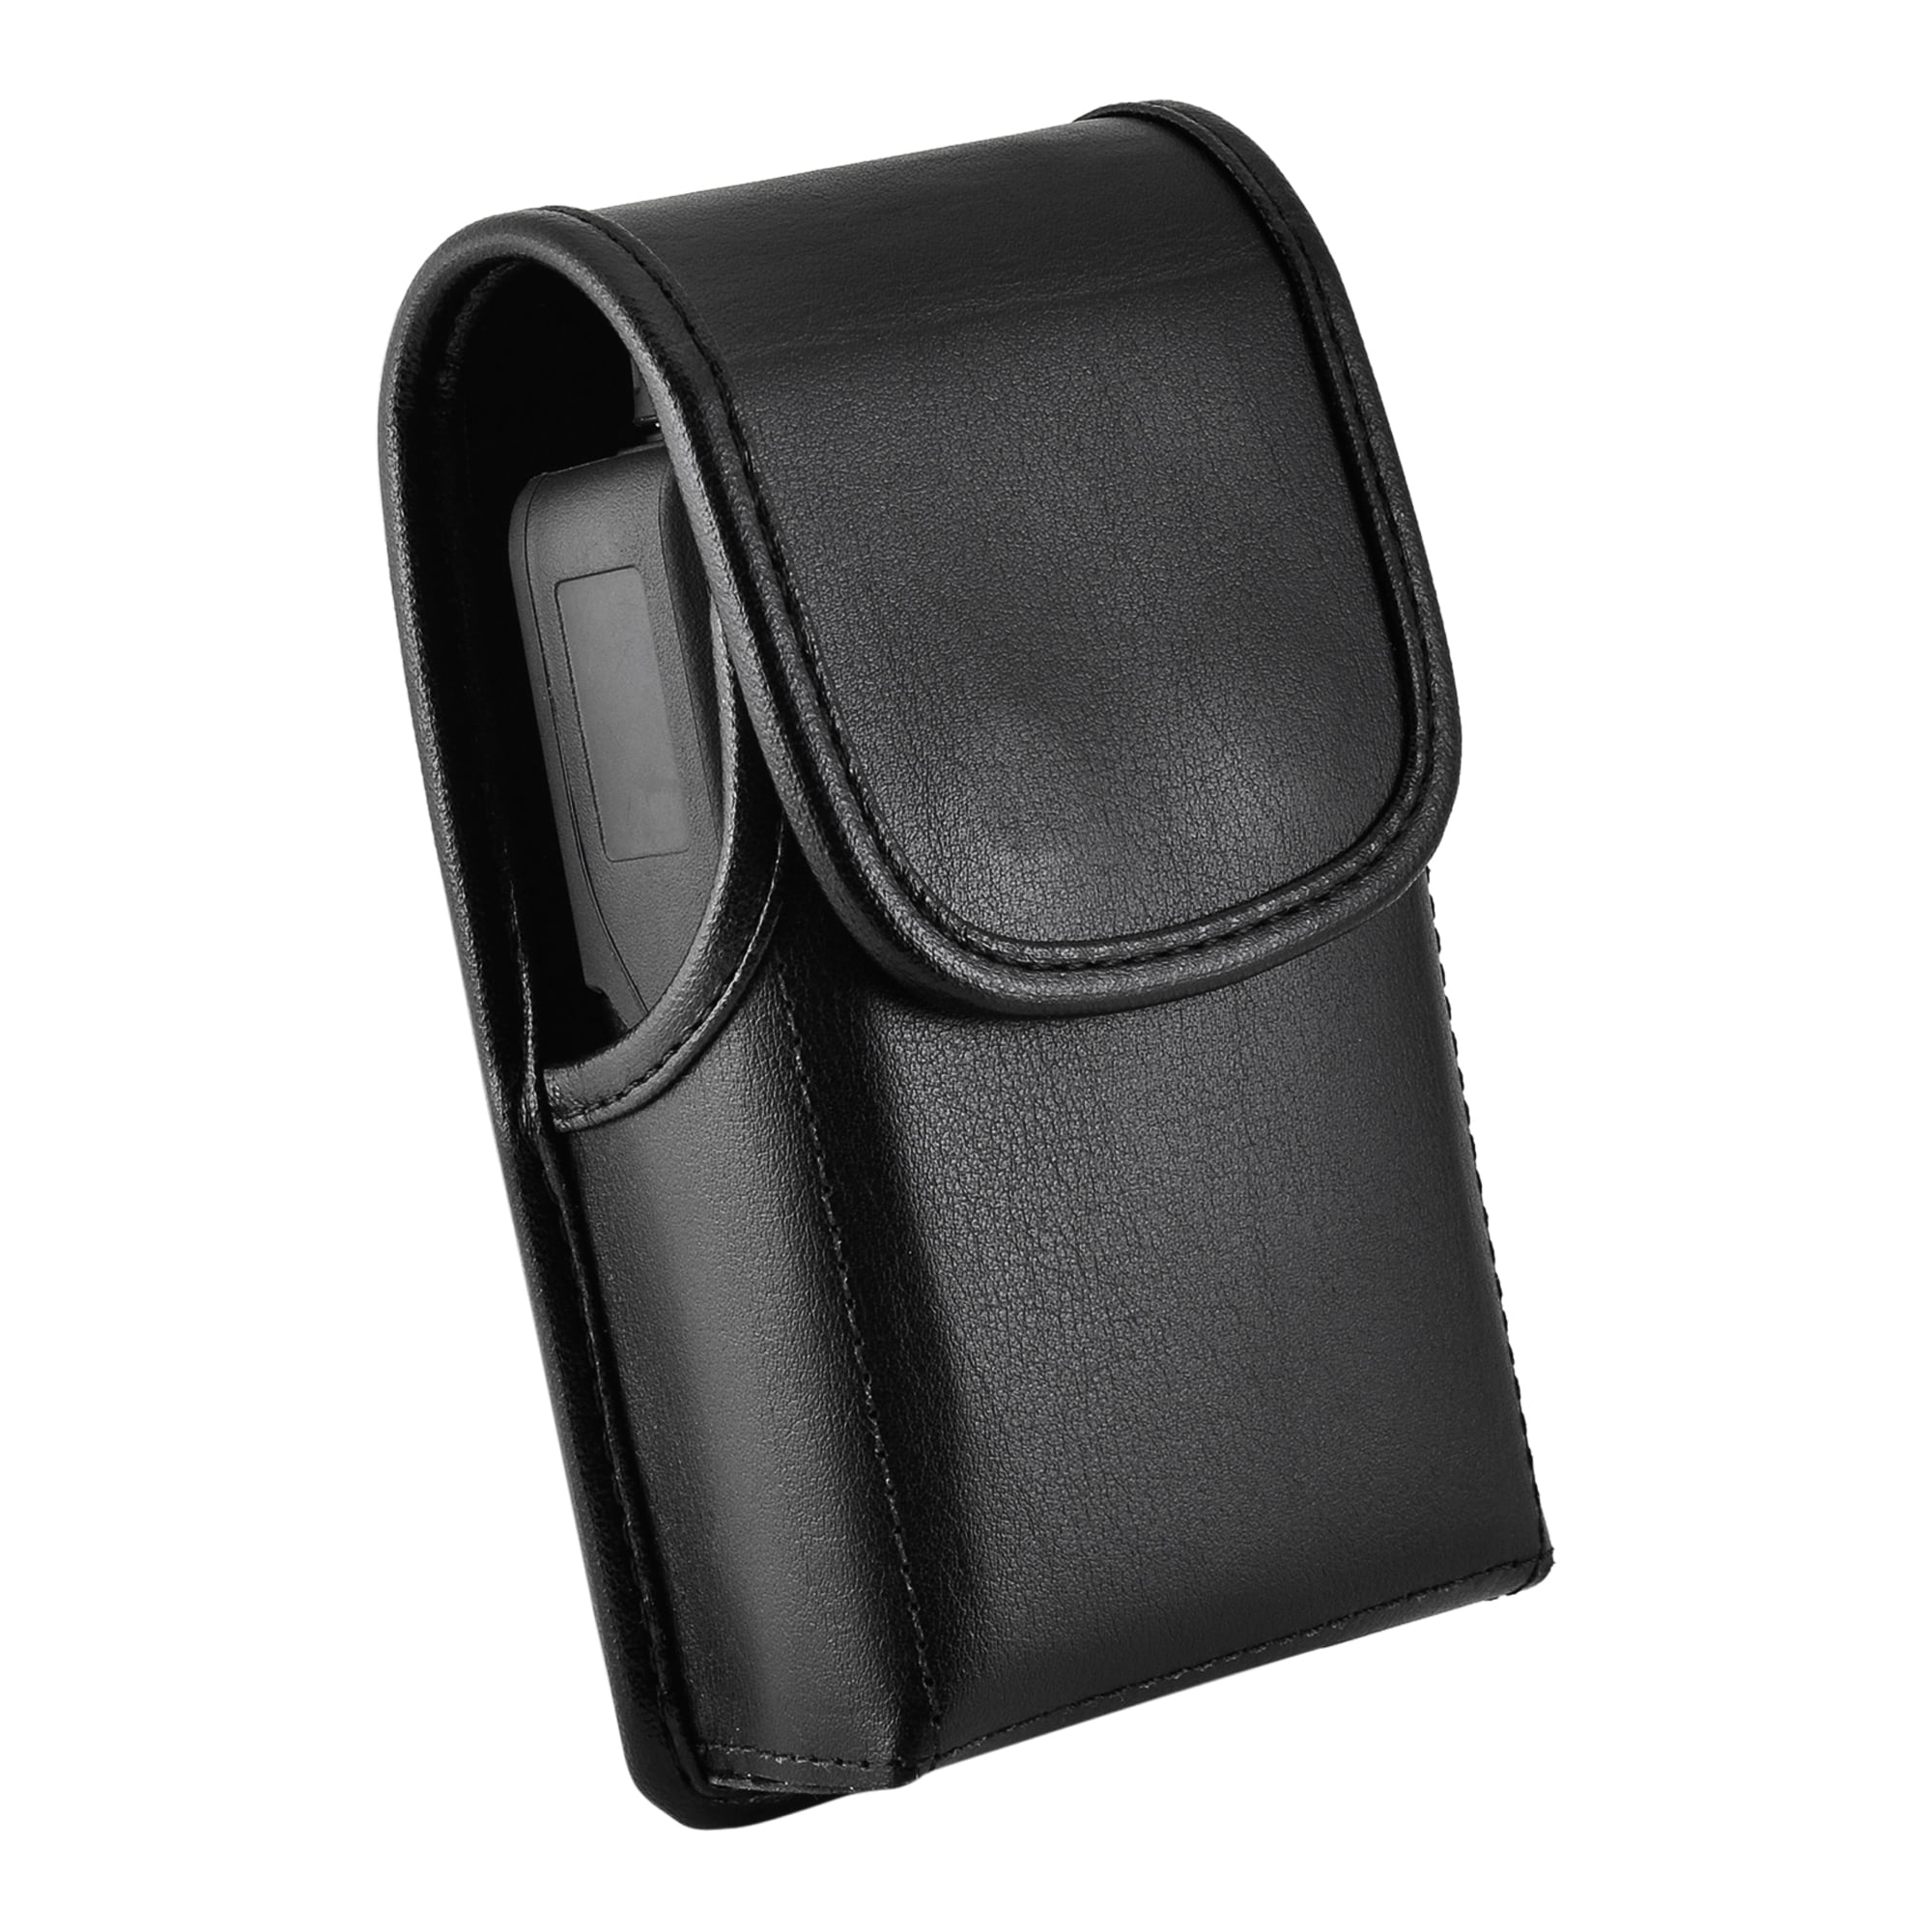 Unication G1 Voice Pager Holster Metal Clip Case Pouch Leather Turtleback